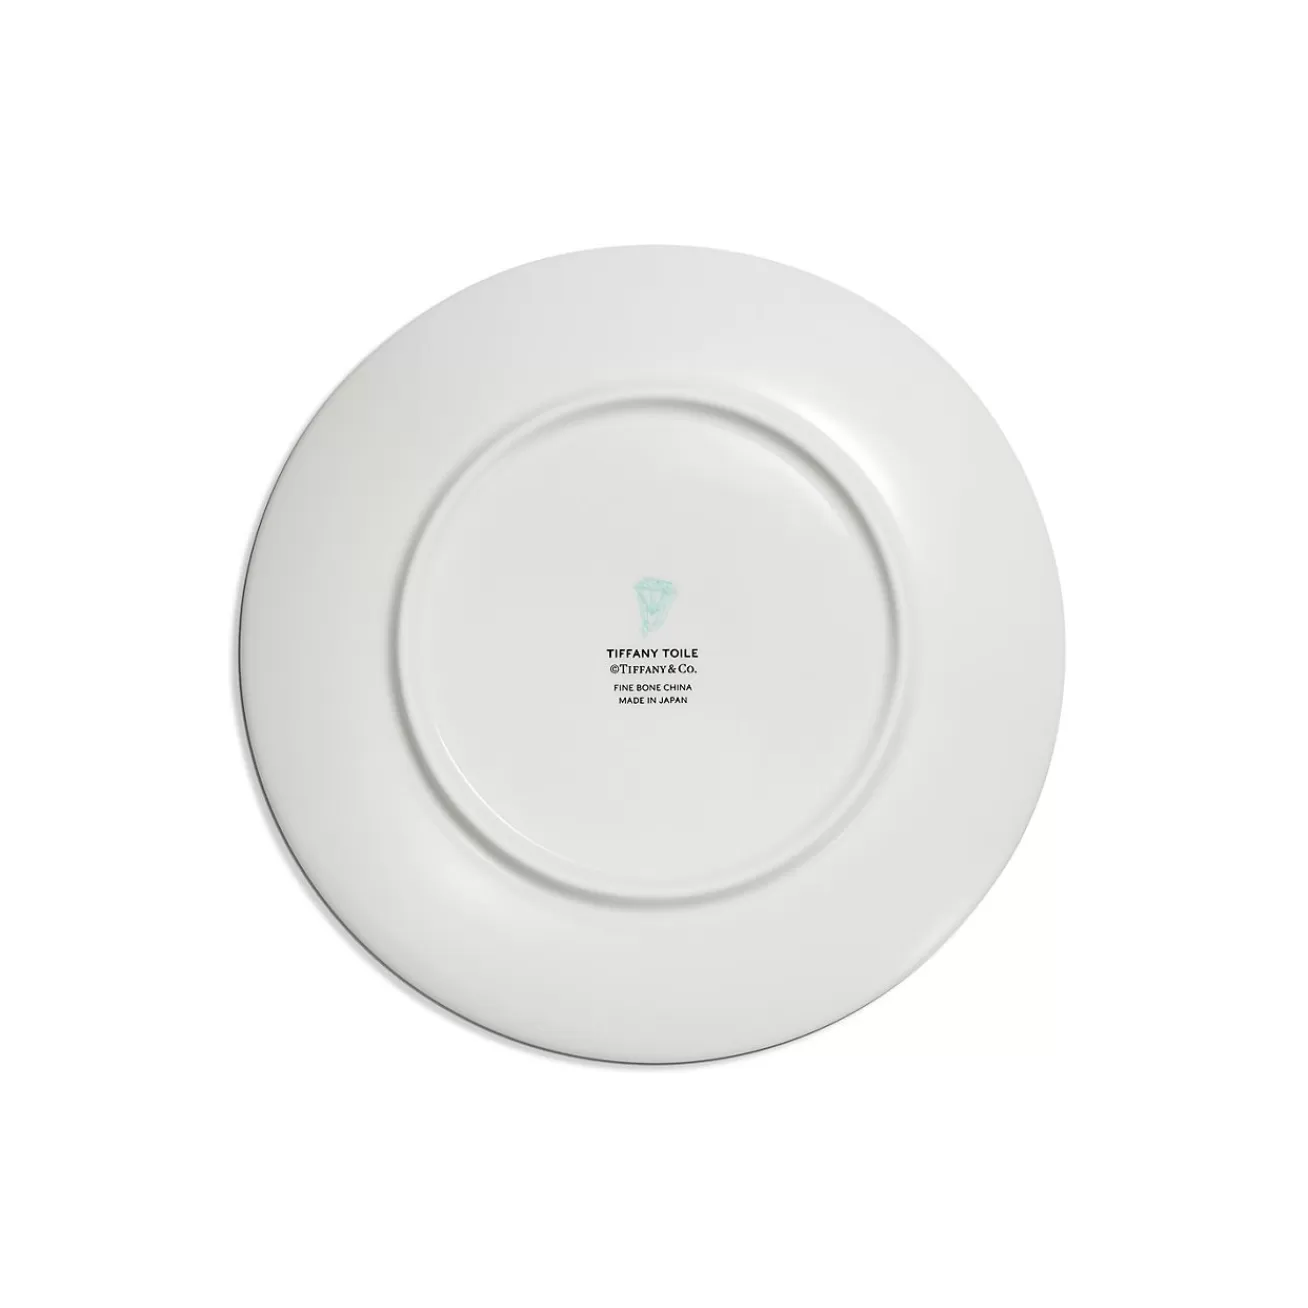 Tiffany & Co. Tiffany Toile Dessert Plate in Sapphire Bone China | ^ The Home | Housewarming Gifts